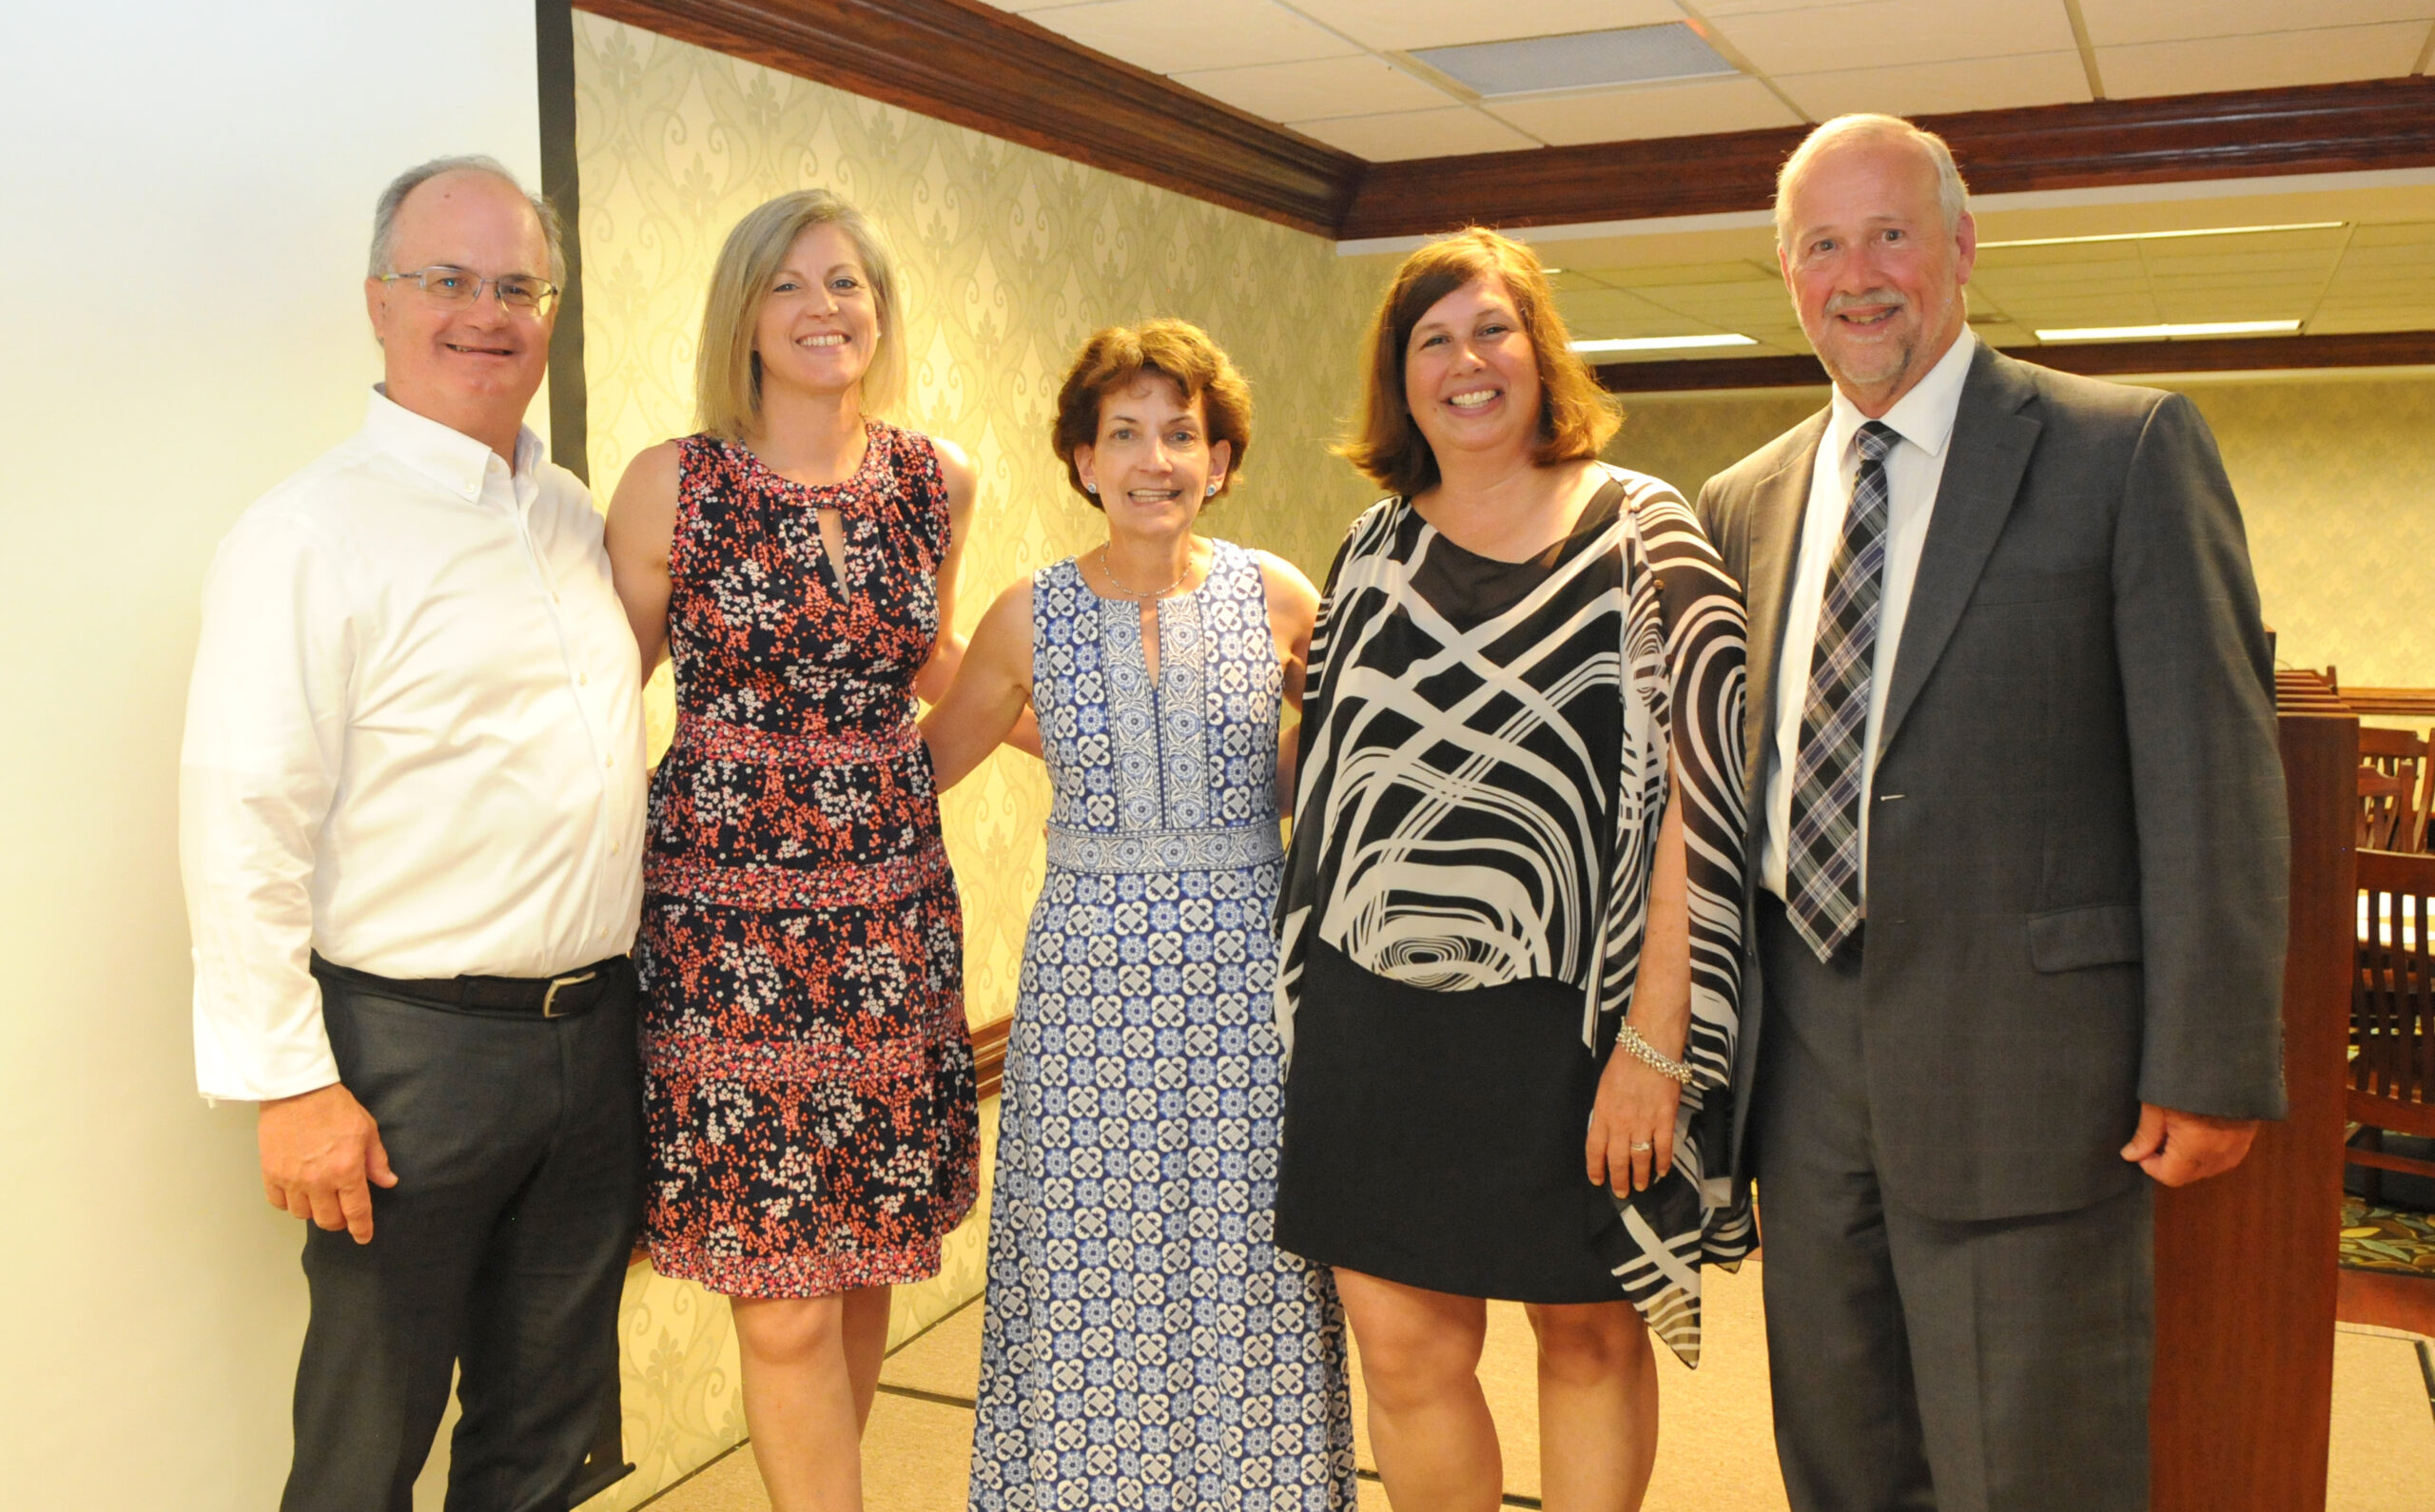 SWJ Mission Award Winner Chris Gebhart poses with Keith Frndak, Rachelle Arnold, Tracey Johnson and Jim Limaugh